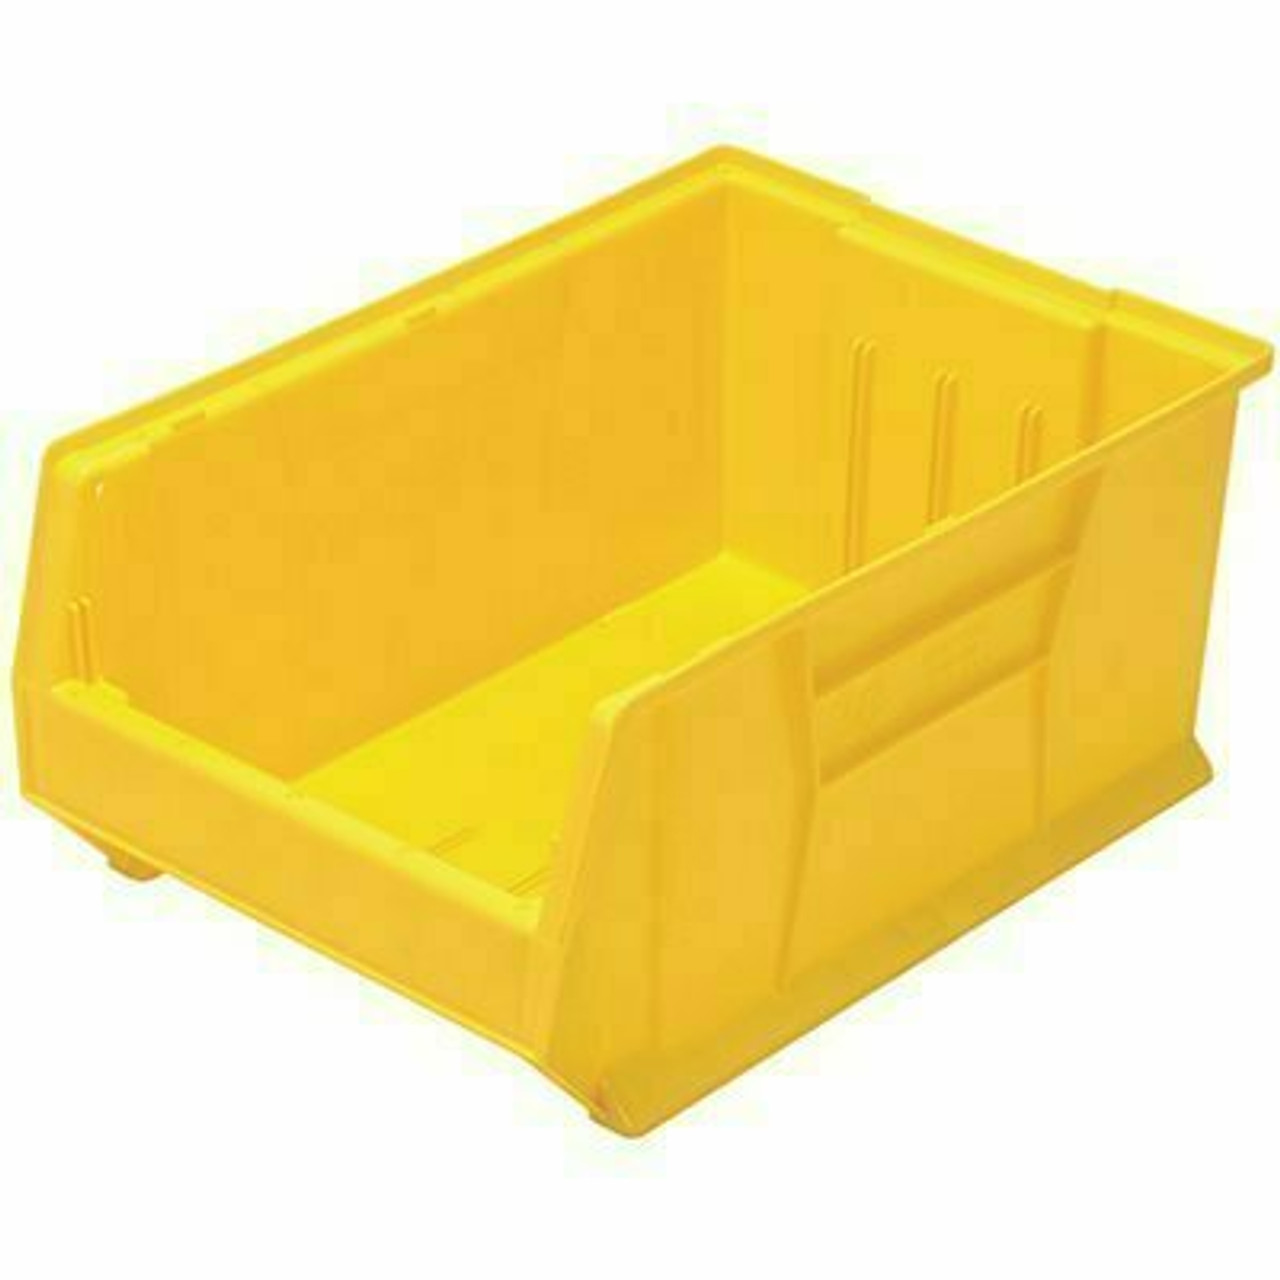 Quantum Storage Systems Hulk Container, 23-7/8 In. X 16-1/2 In. X 11 In., Yellow